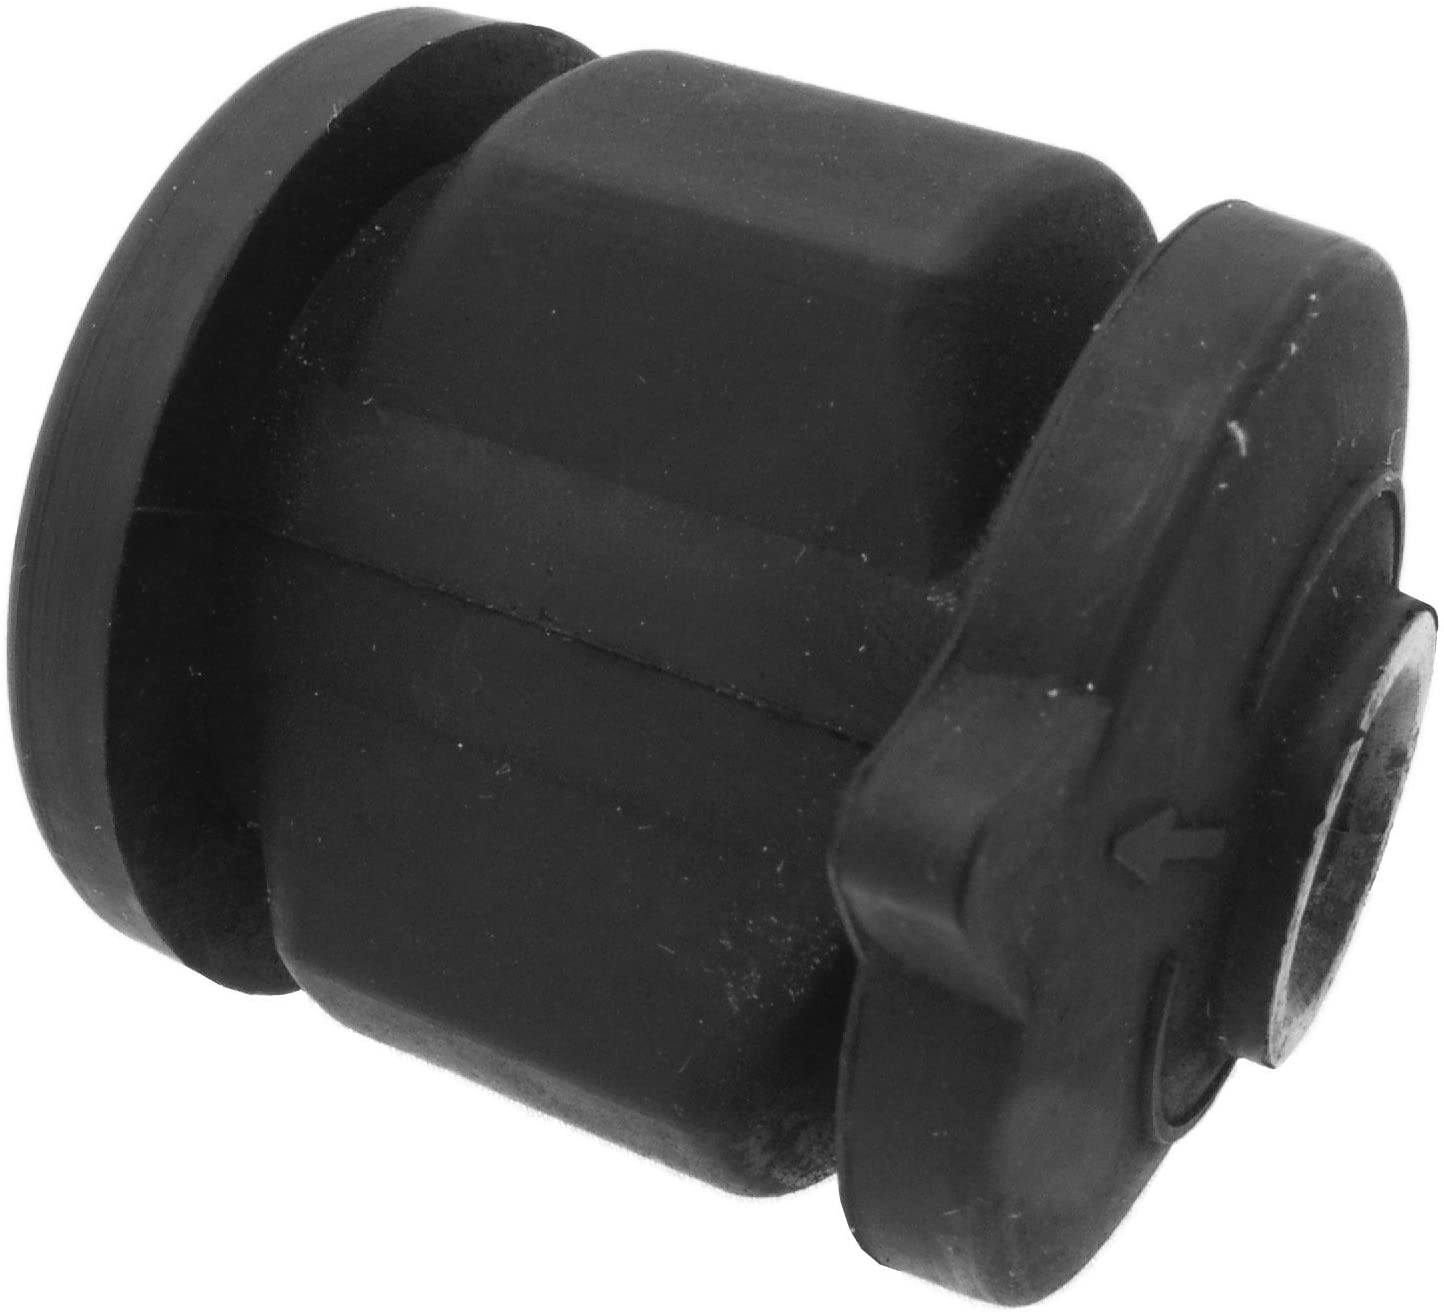 FEBEST TAB-018 Arm Bushing for Lateral Control Rod